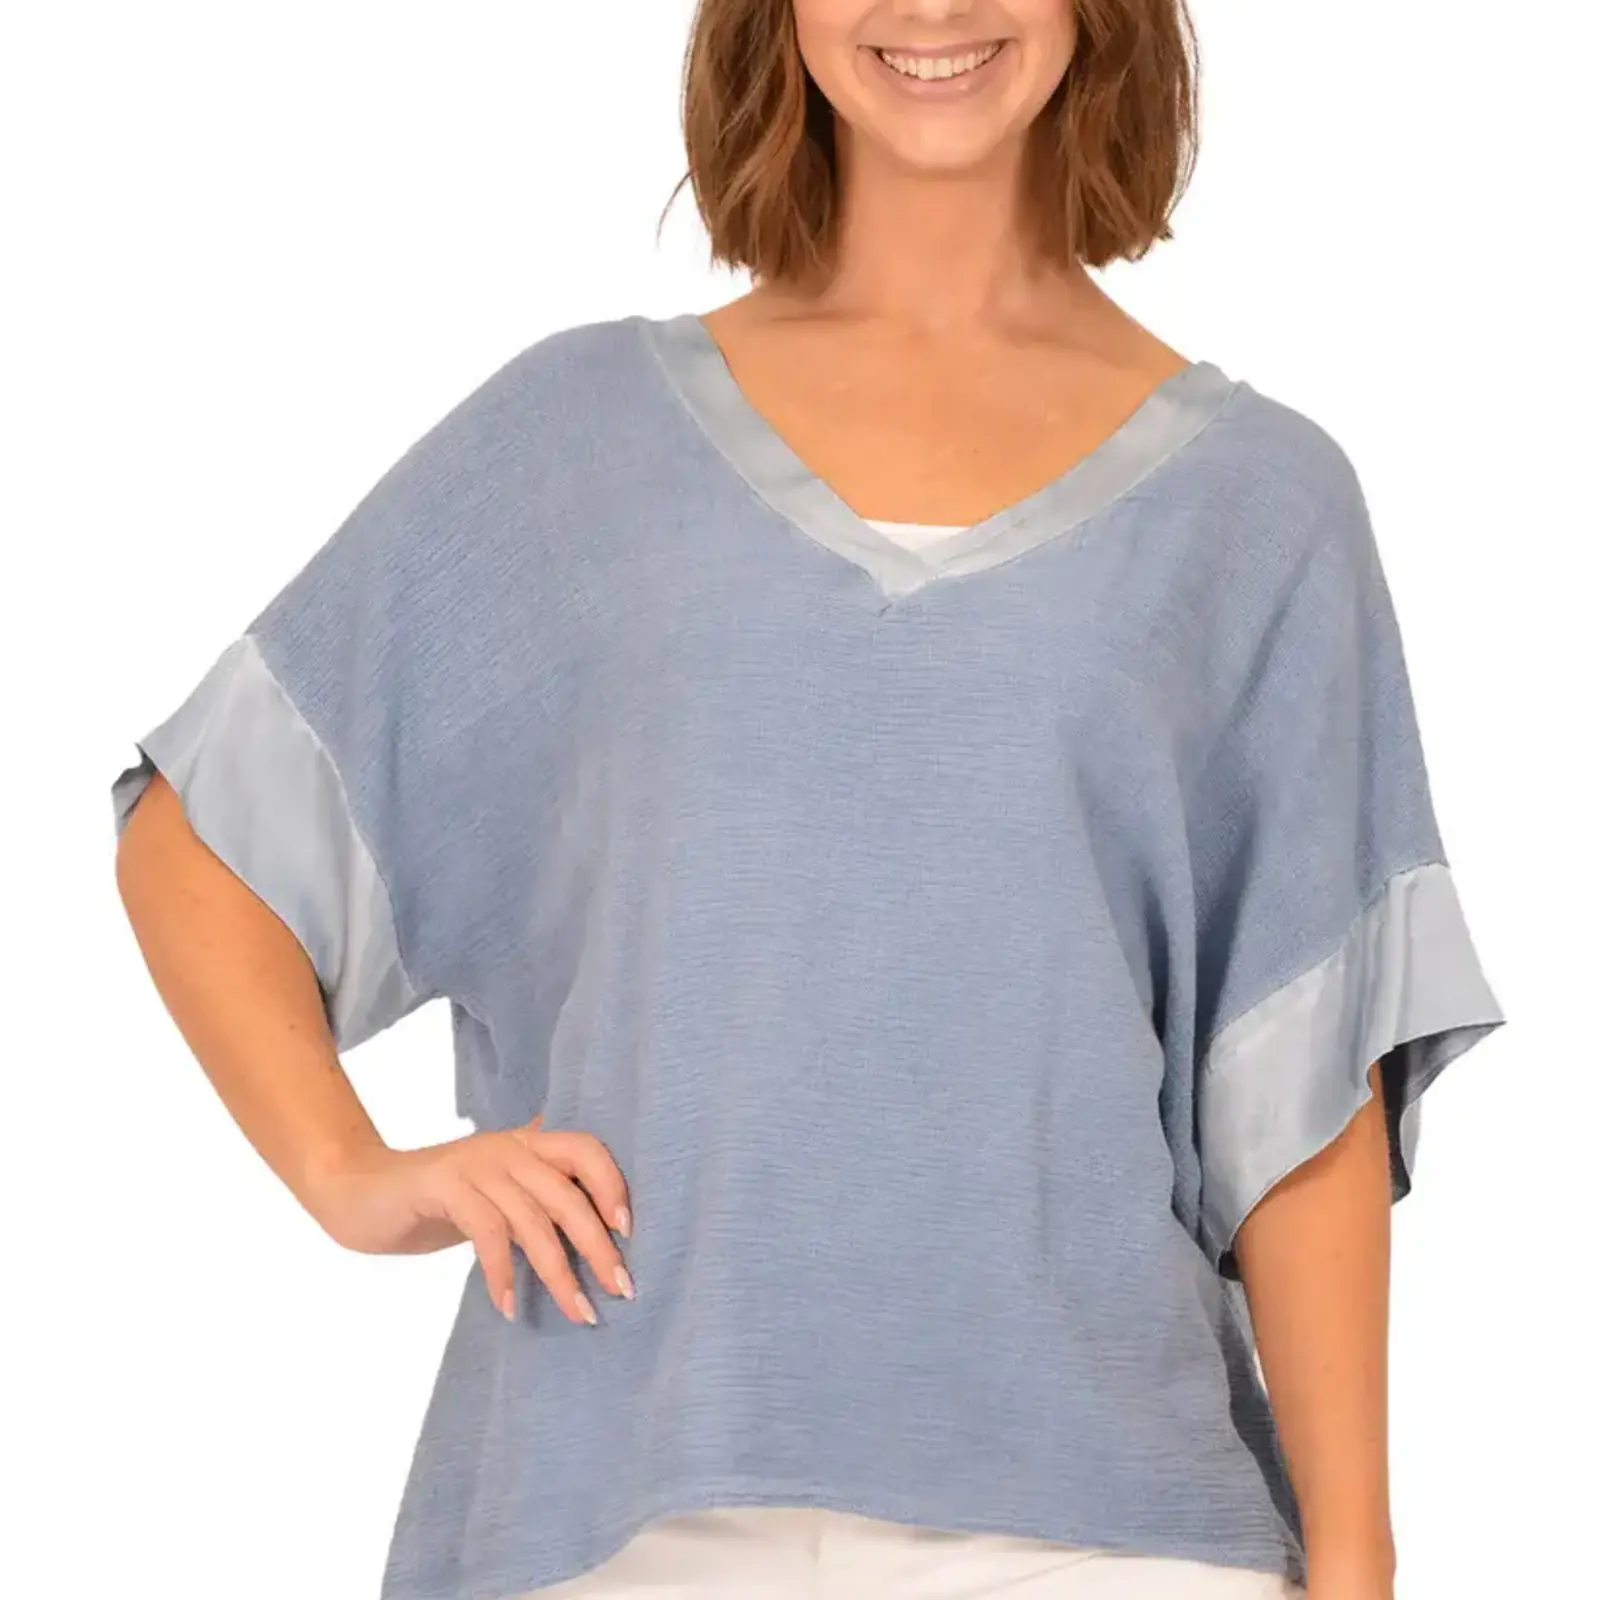 Catherine Lillywhite's Blue  Satin Edge Tee  Made in Italy  ITEL809903BJ loading=